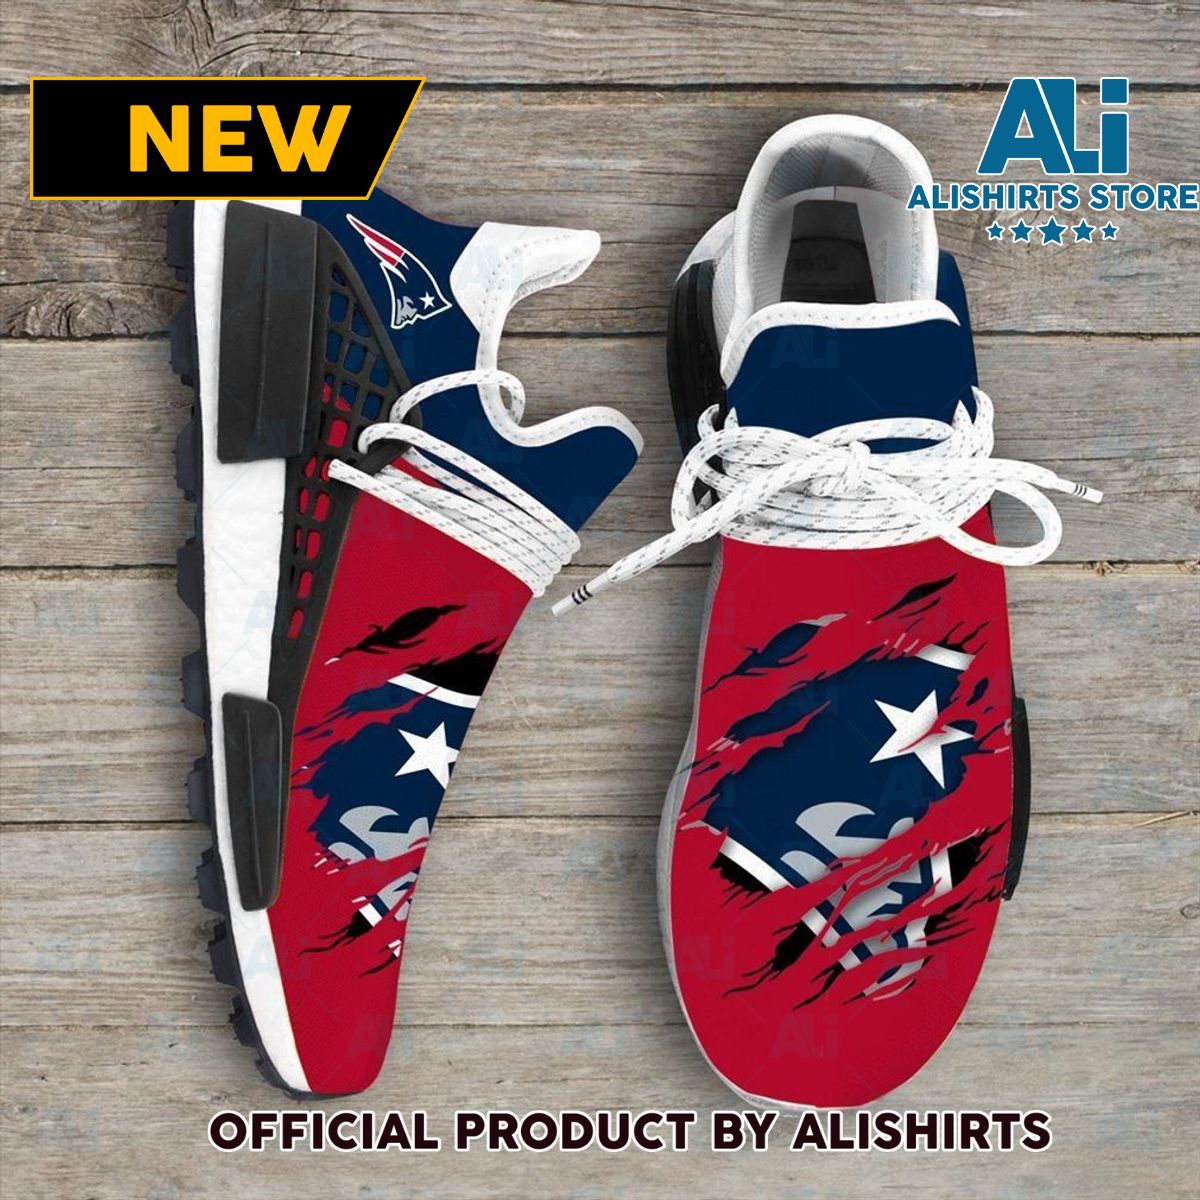 New England Patriots NFL Sport Teams NMD Human Race Adidas NMD Sneakers